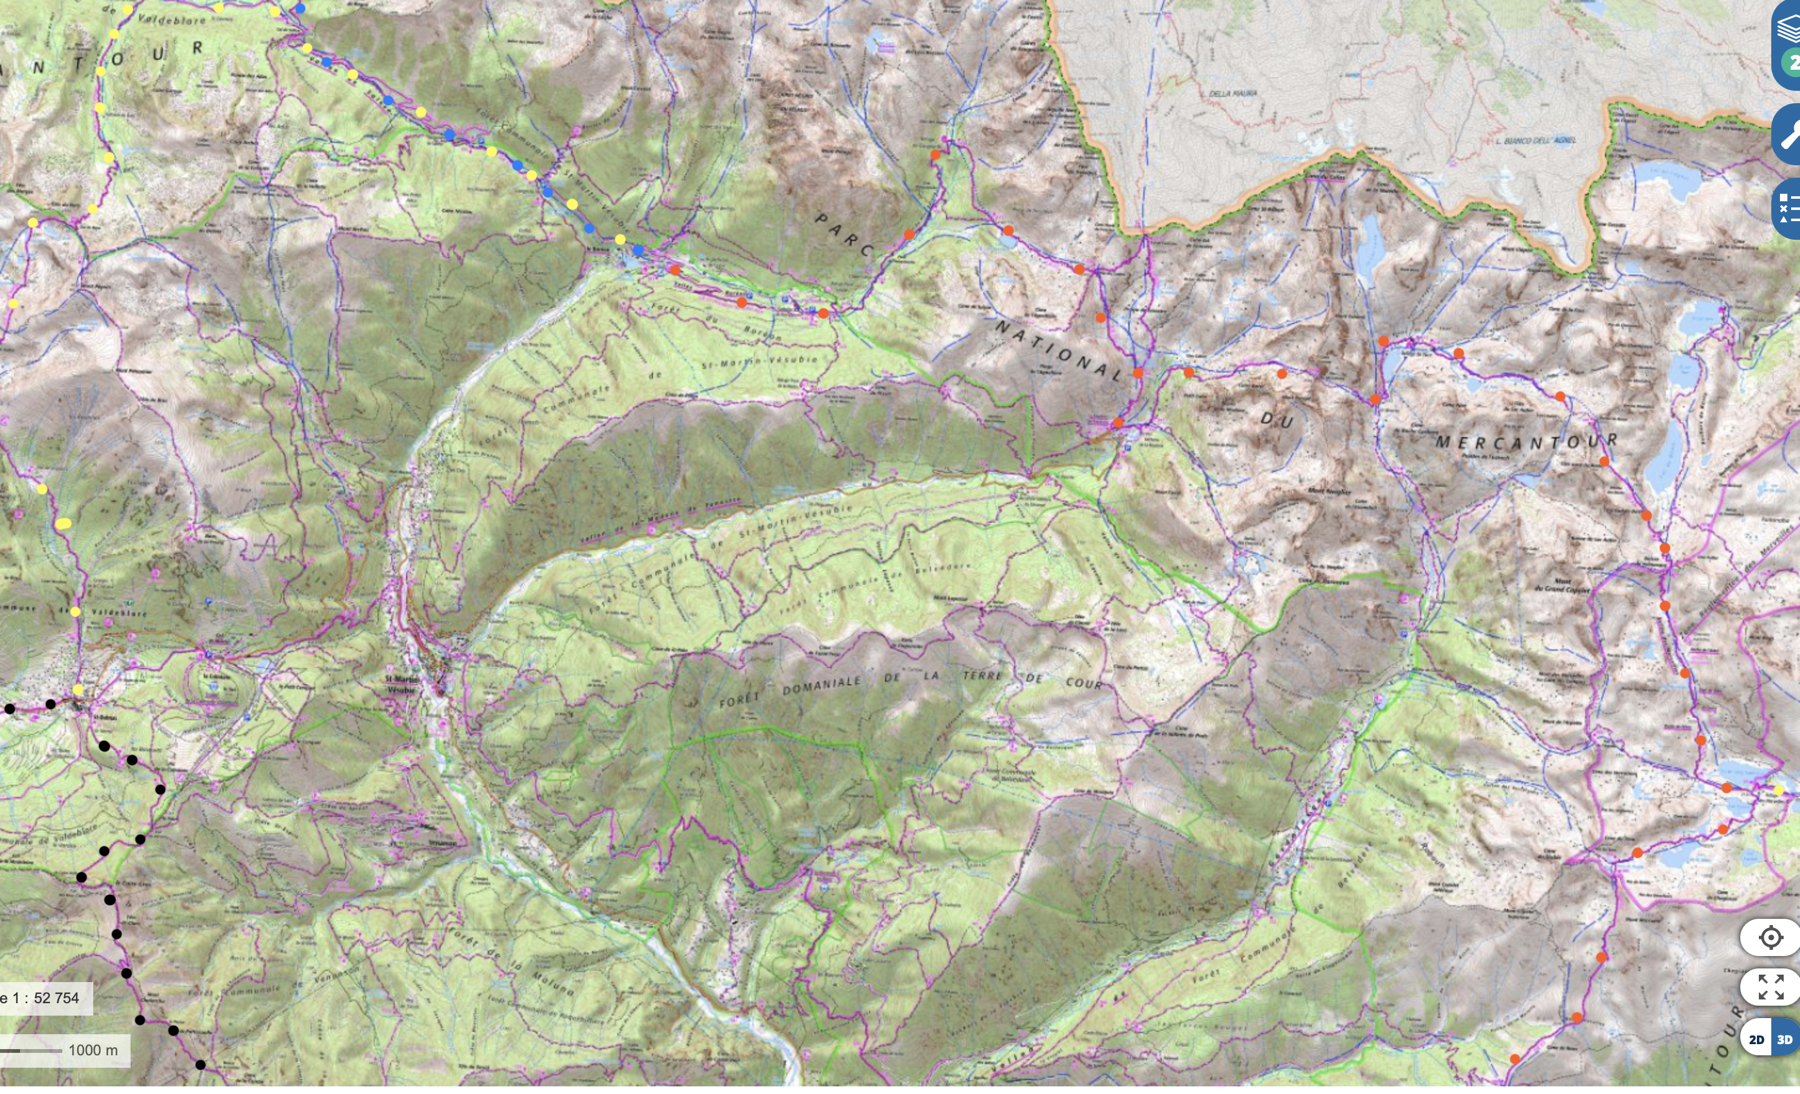 GR5 and GR52 routes near the Mediterranean 